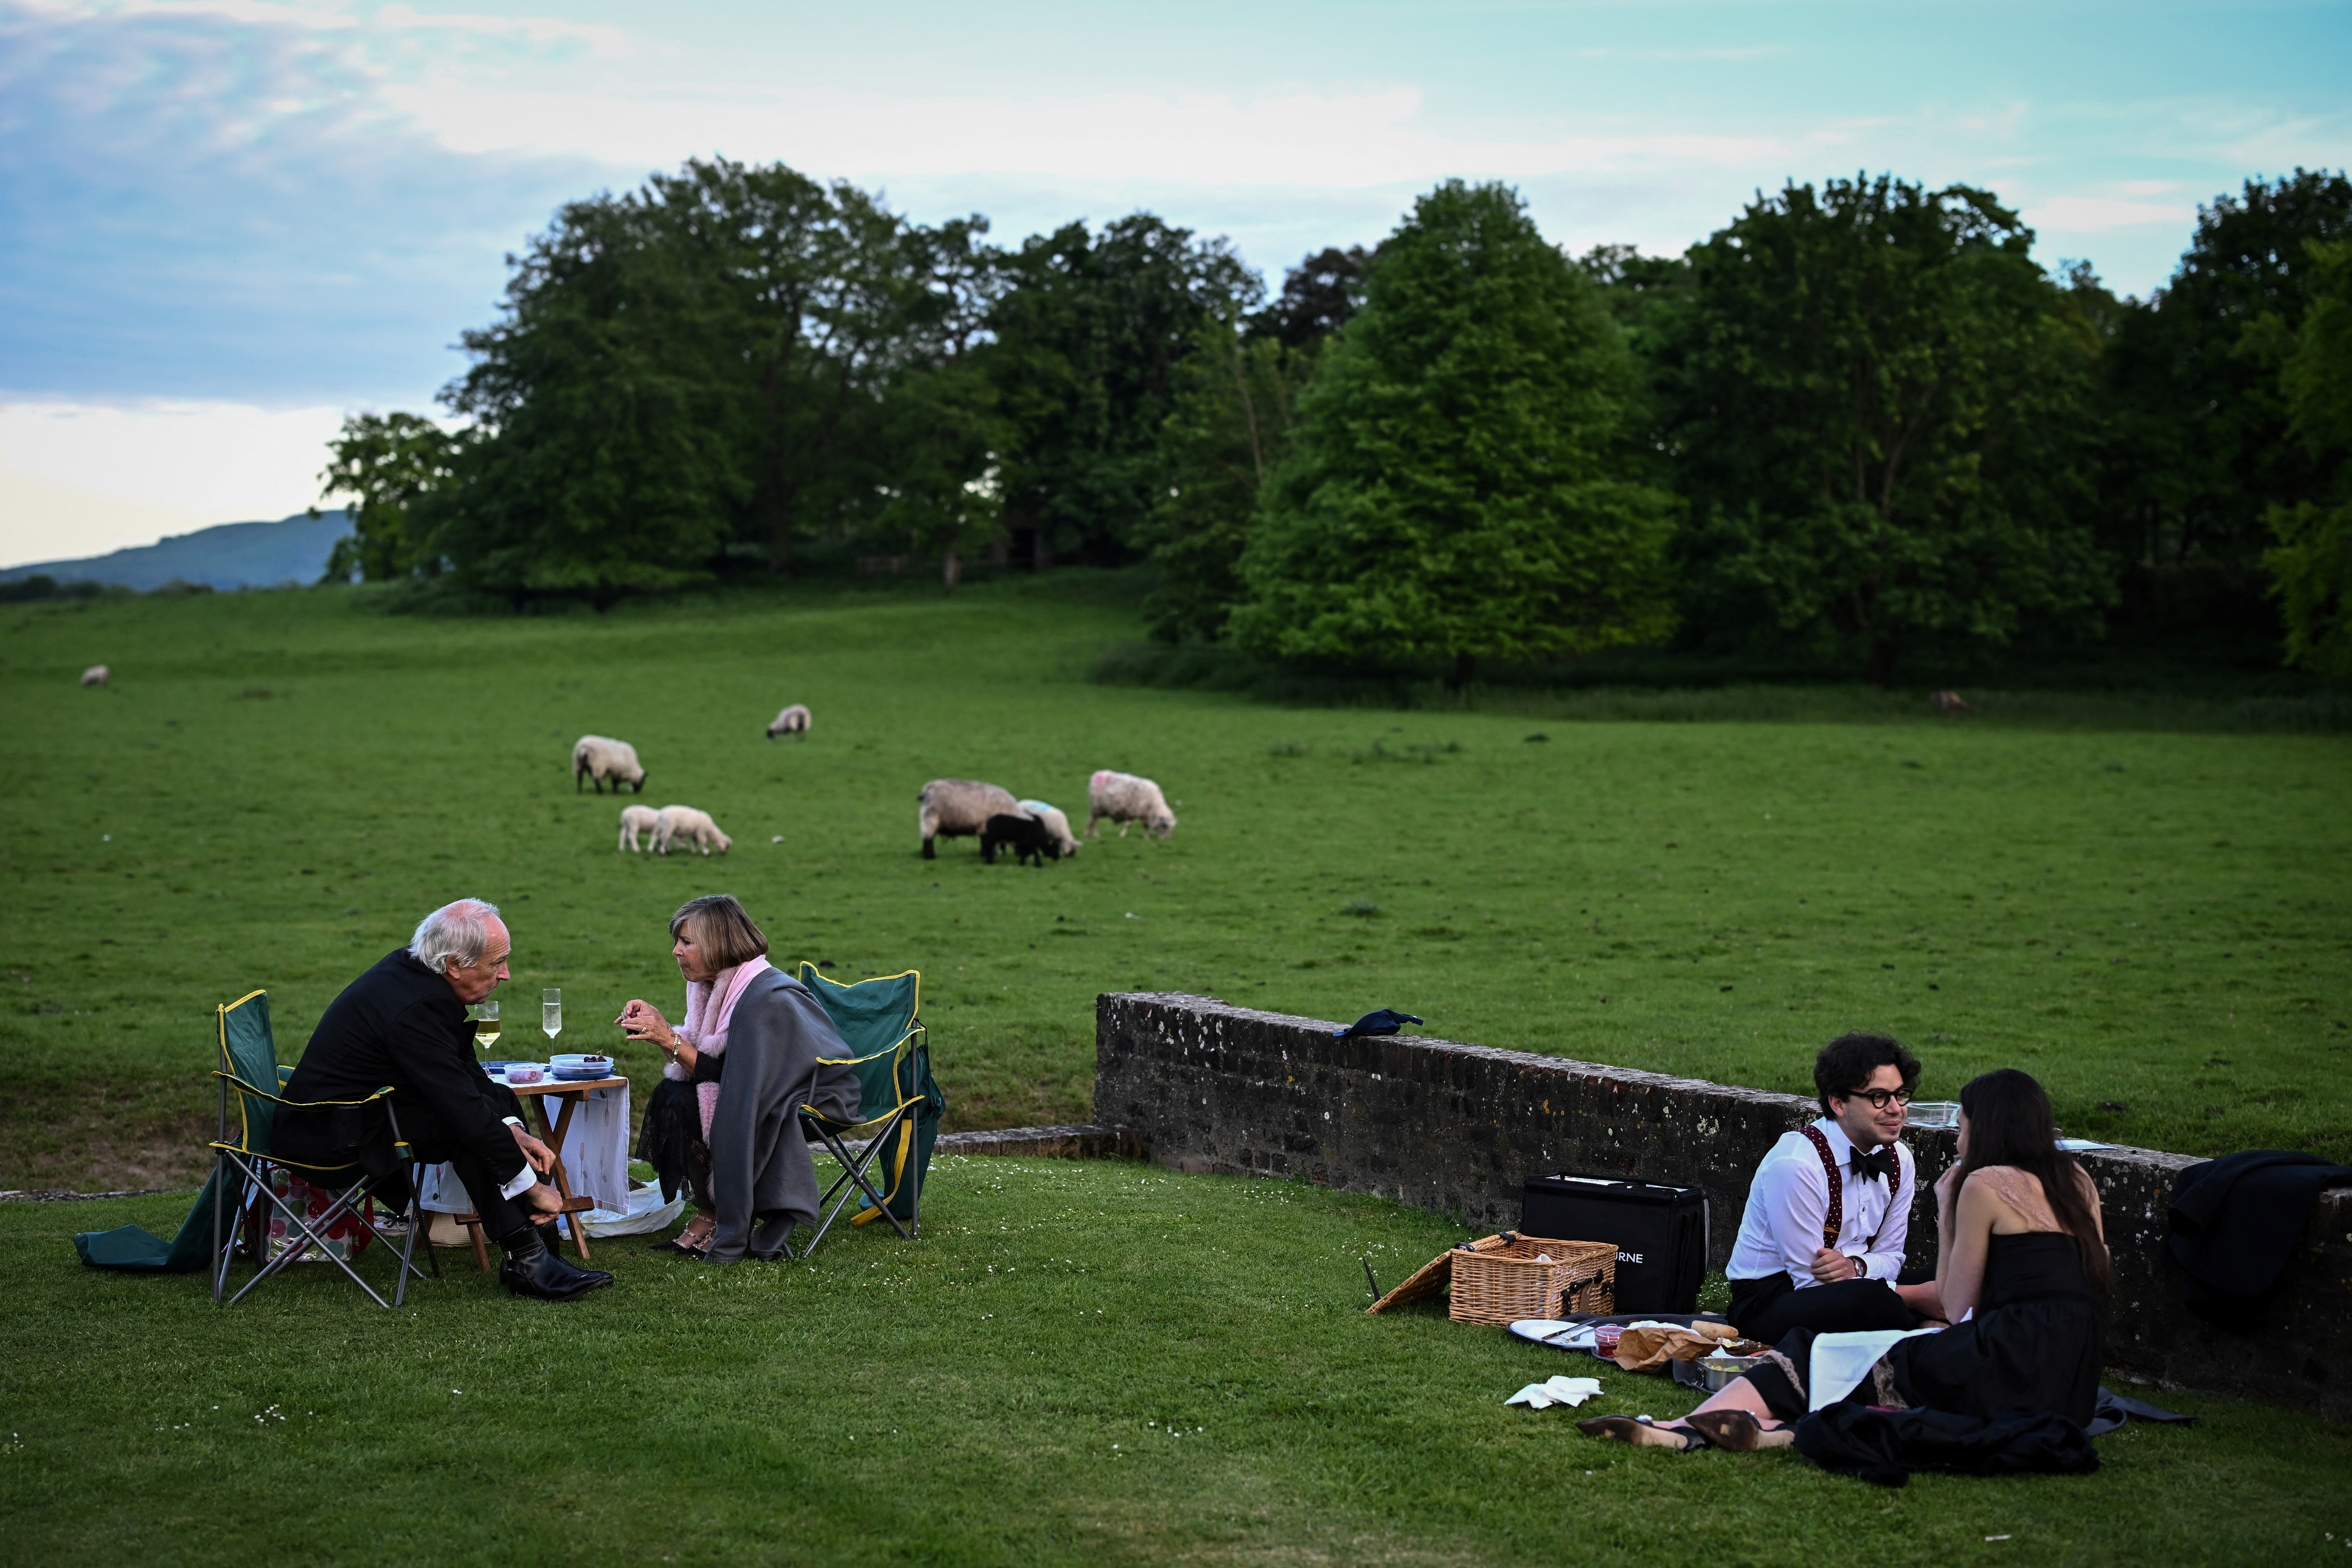 Opera and picnics with the sheep at Glyndebourne